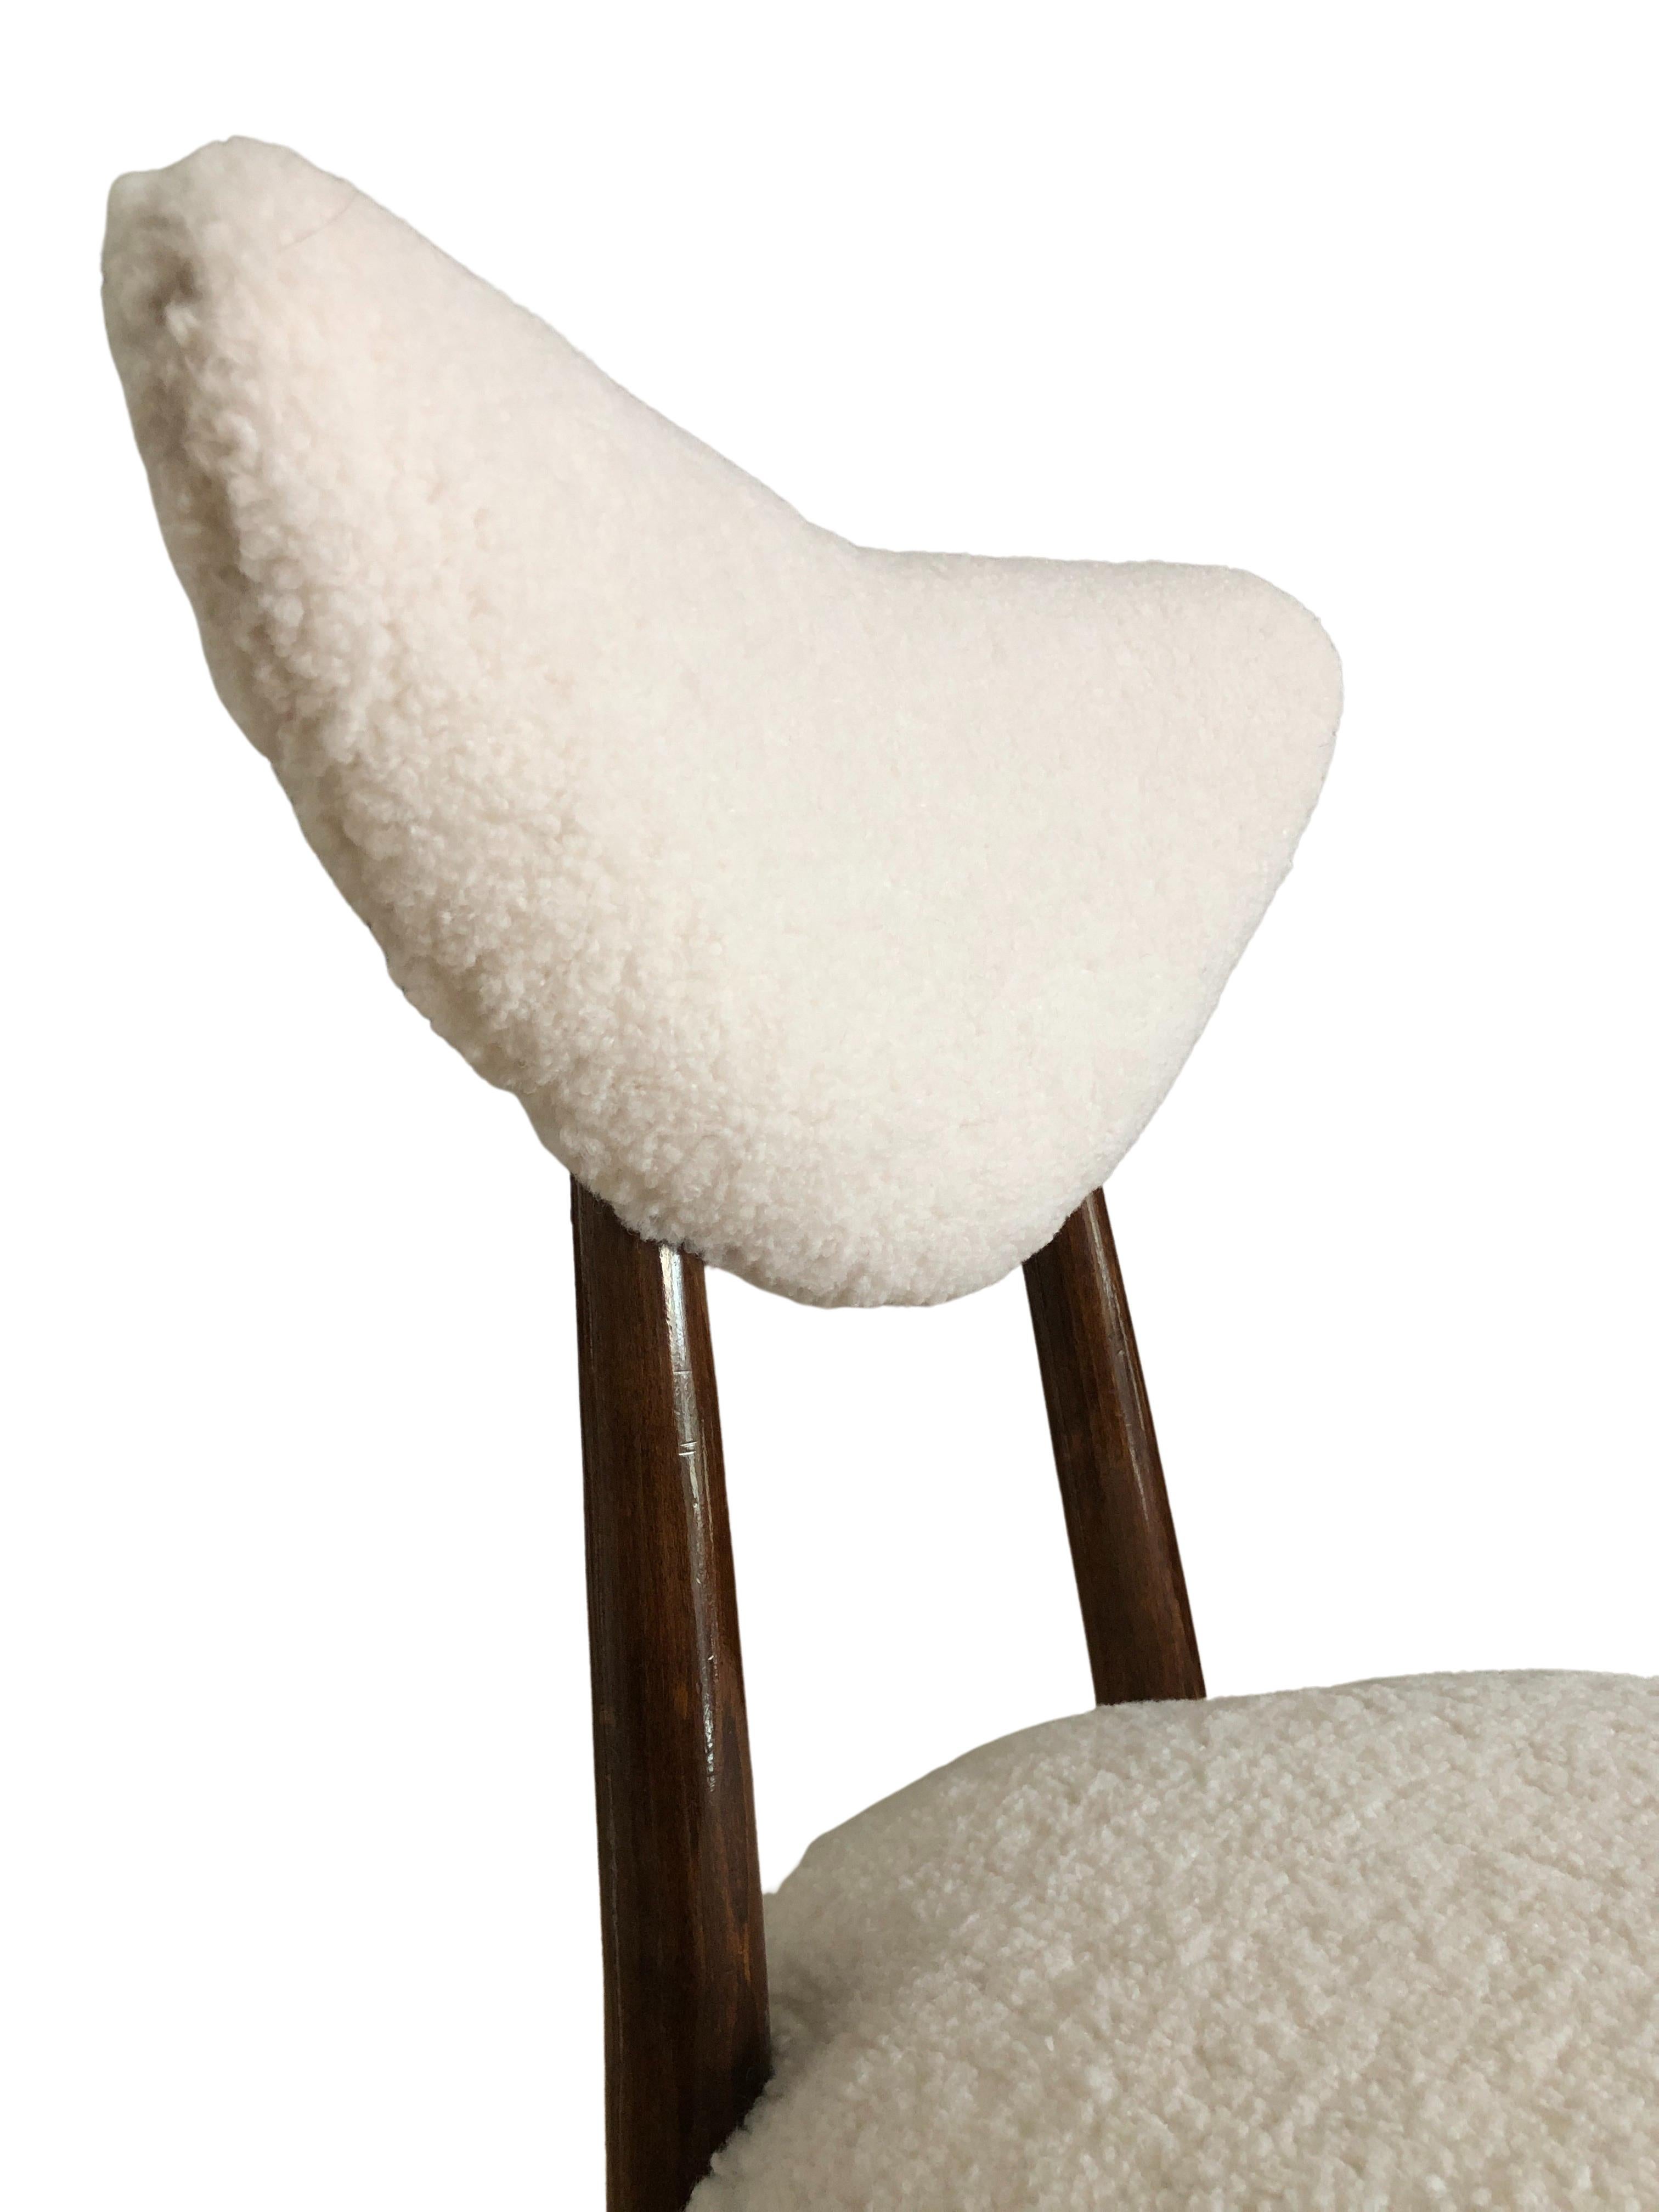 Polish Set of Four Midcentury White bouclé Heart Chairs, by Kurmanowicz, 1960s For Sale